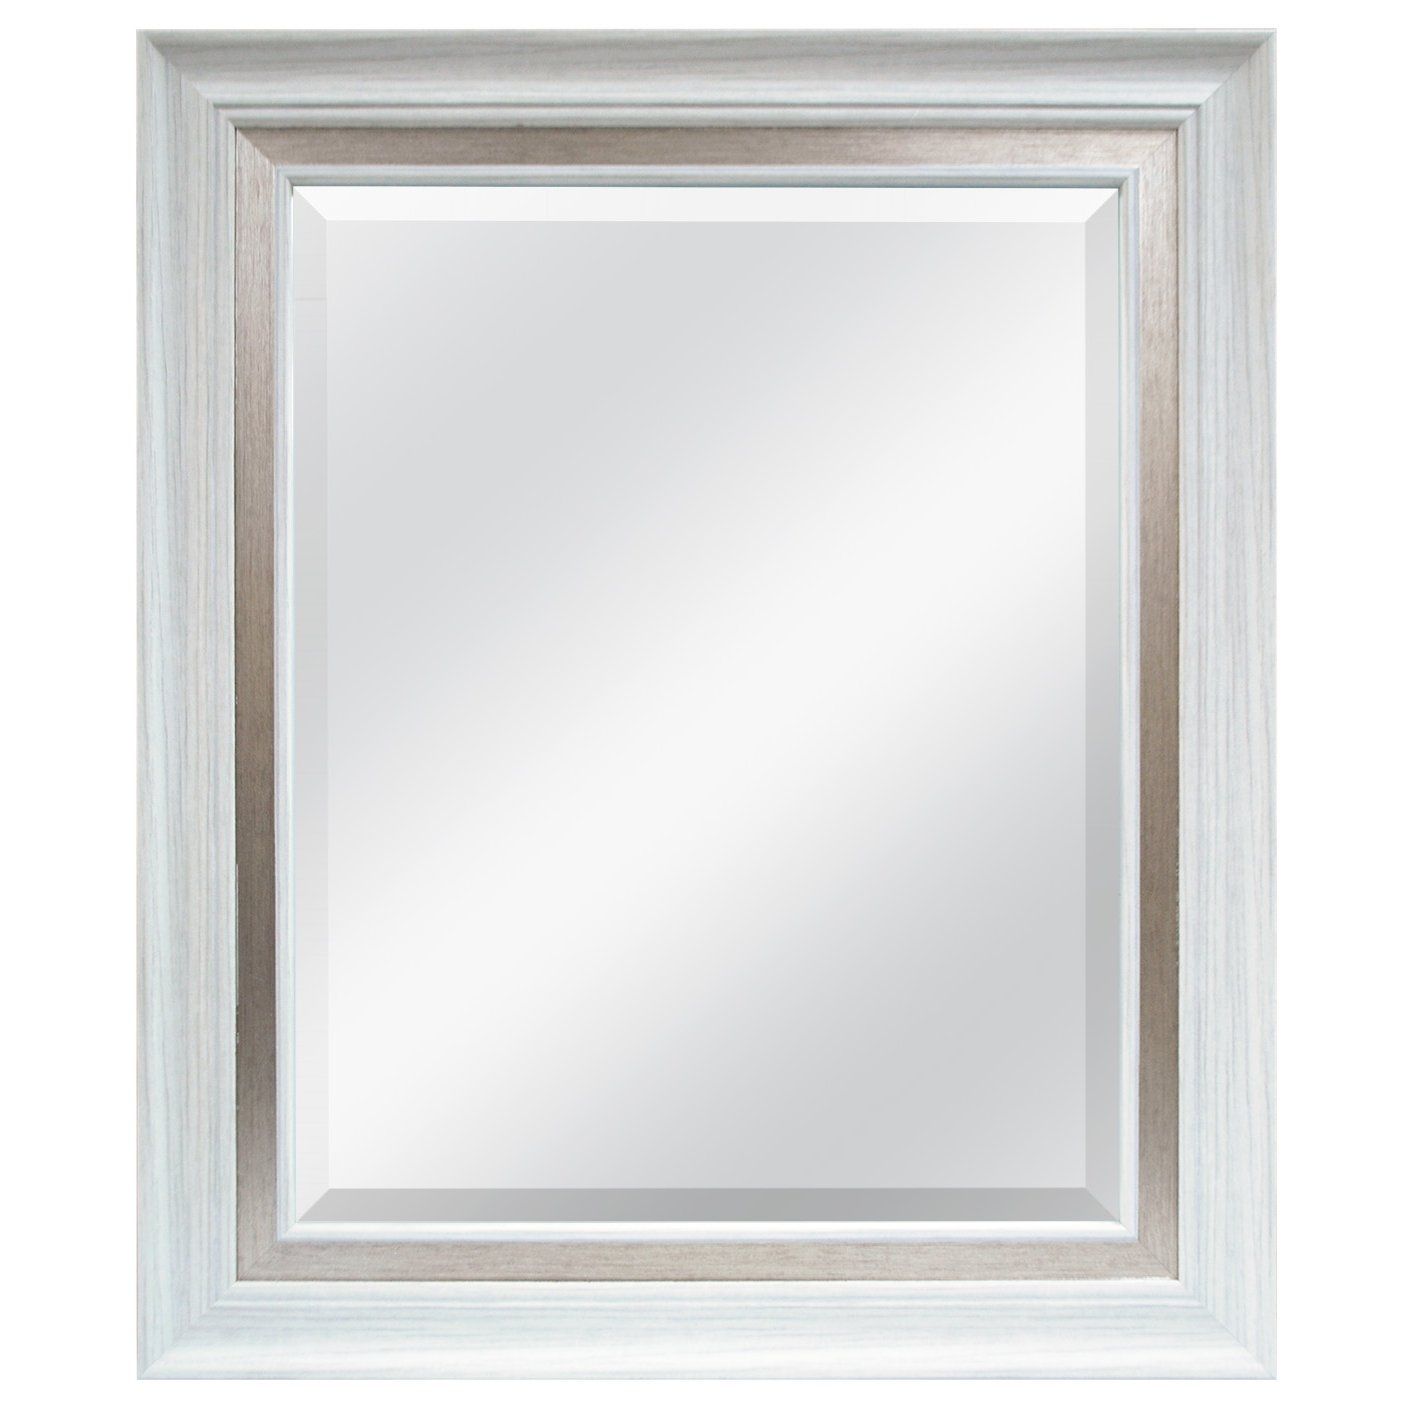 Lark Manor White Brushed Steel Beveled Wall Mirror Reviews Wayfair Throughout Bevelled Wall Mirror (View 4 of 15)